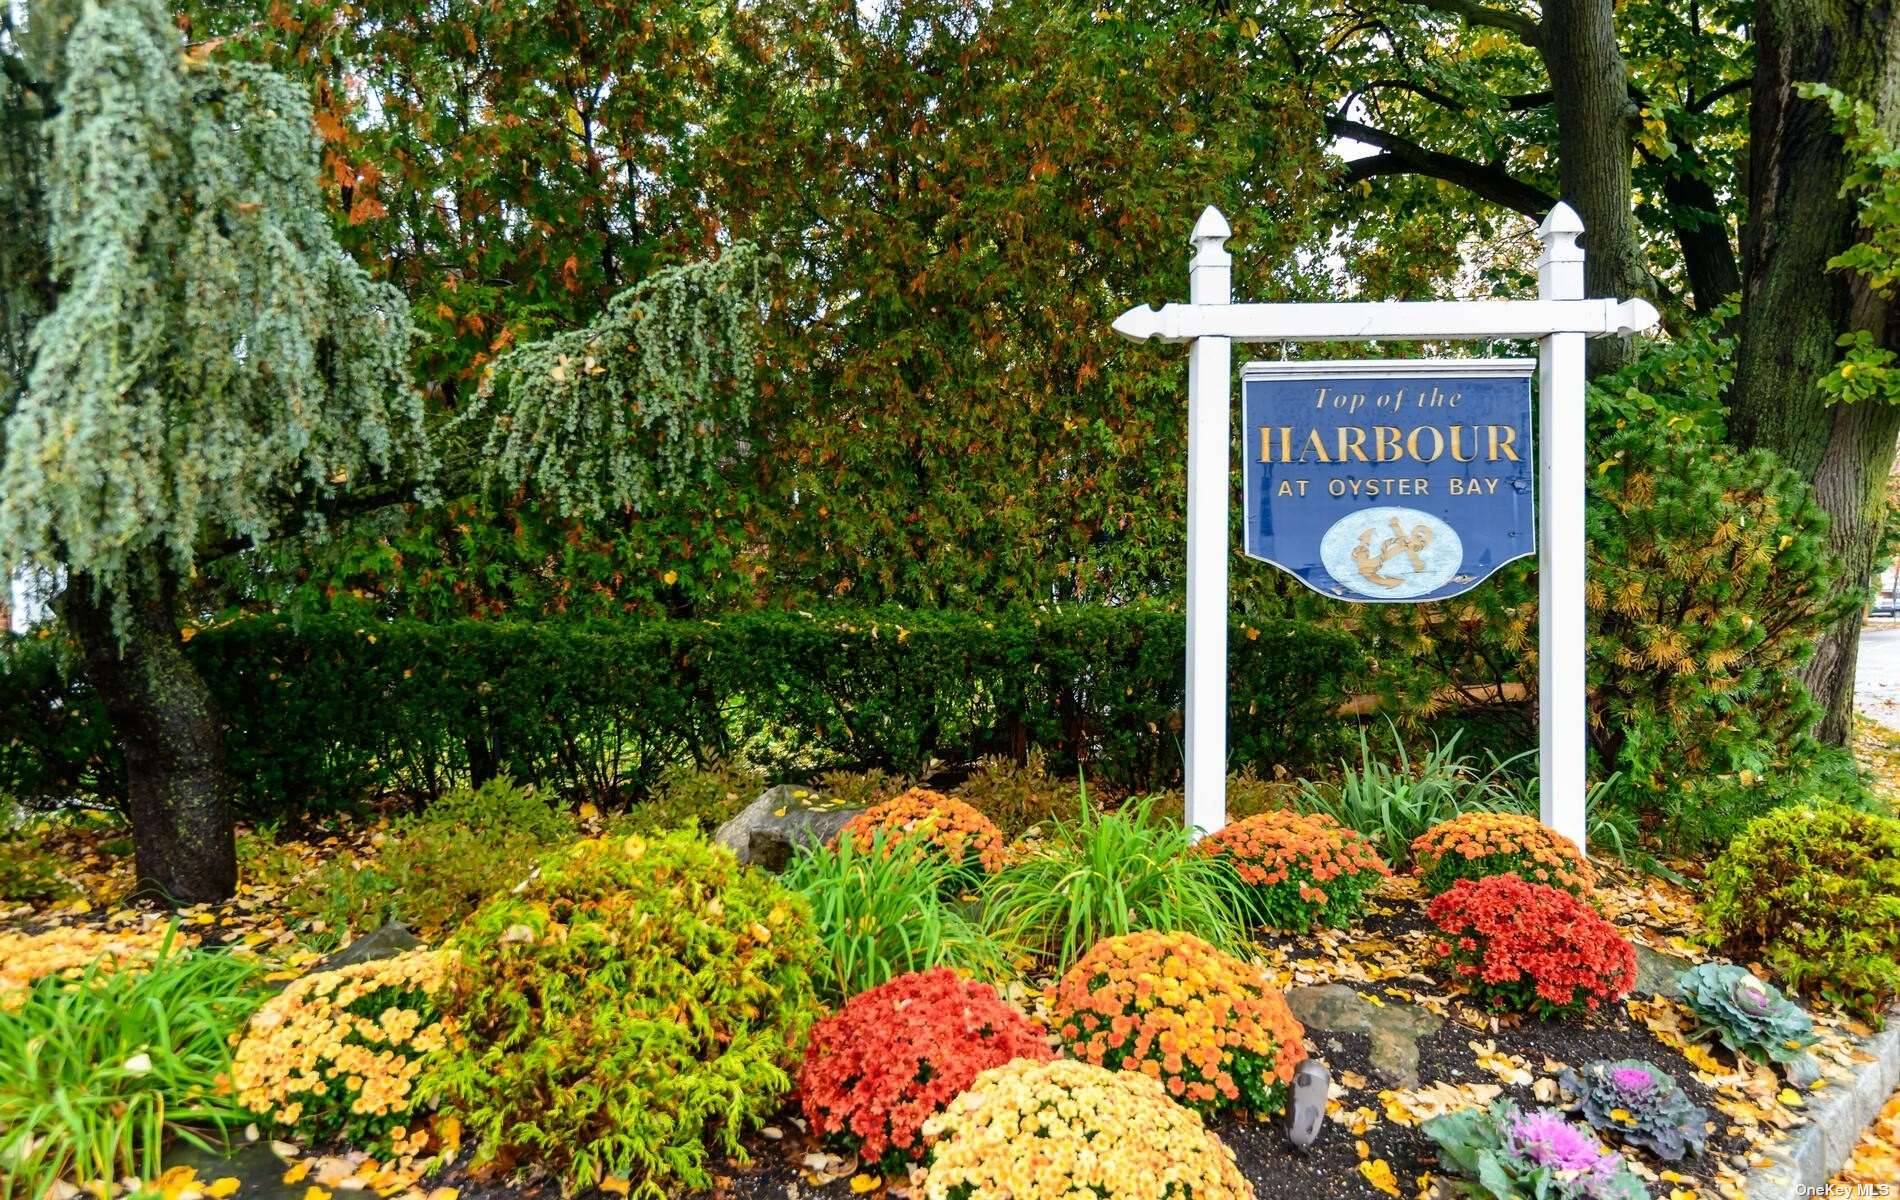 Top Of The Harbour is Located in the Heart of Historic Oyster Bay Hamlet, Convenient to Quaint Main Street with Alfresco Restaurants, Shopping and farmers Market, Beaches, Boating and fishing, ...